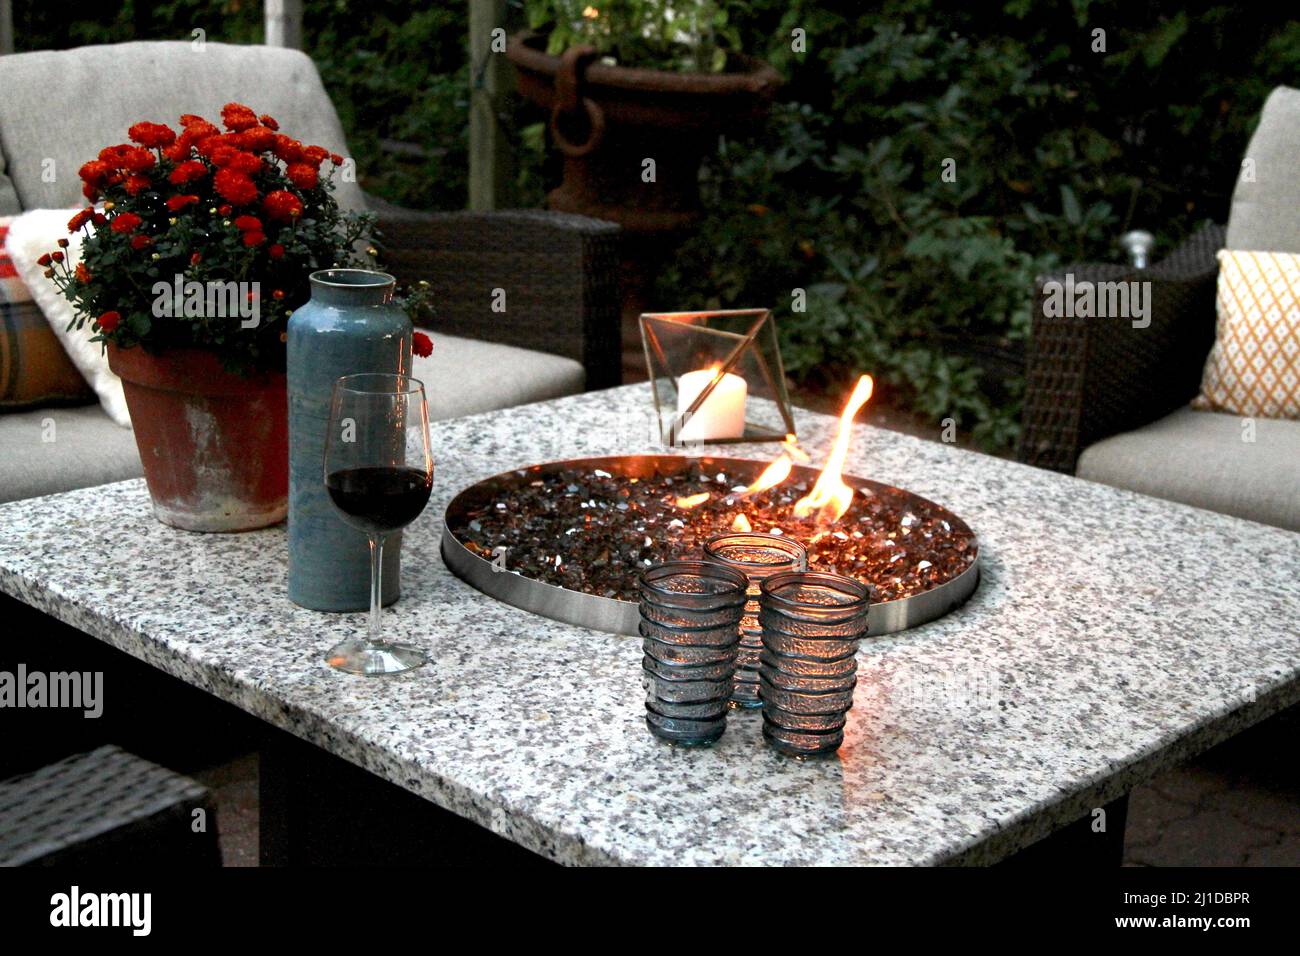 Outdoor seating arrangement around a gas fire pit table in the fall Stock Photo